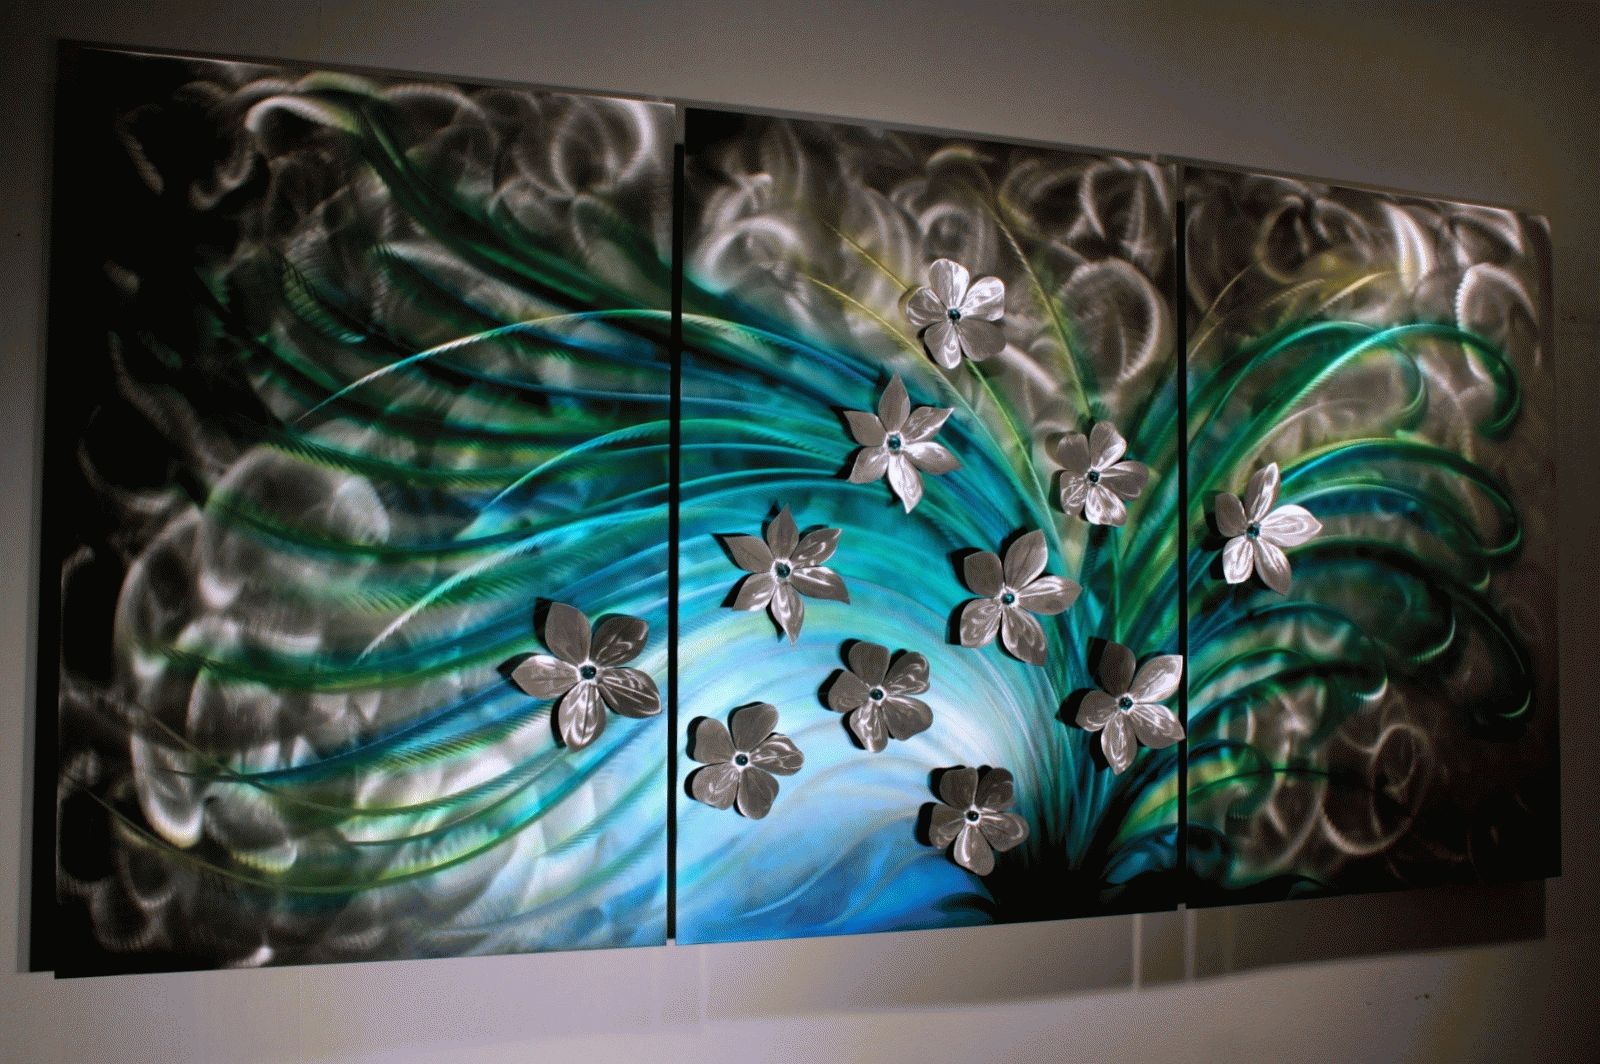 Floral Art, Metal Wall Sculpture, Abstract Home Decor Painting Within Most Recently Released Home Metal Wall Art (View 16 of 20)